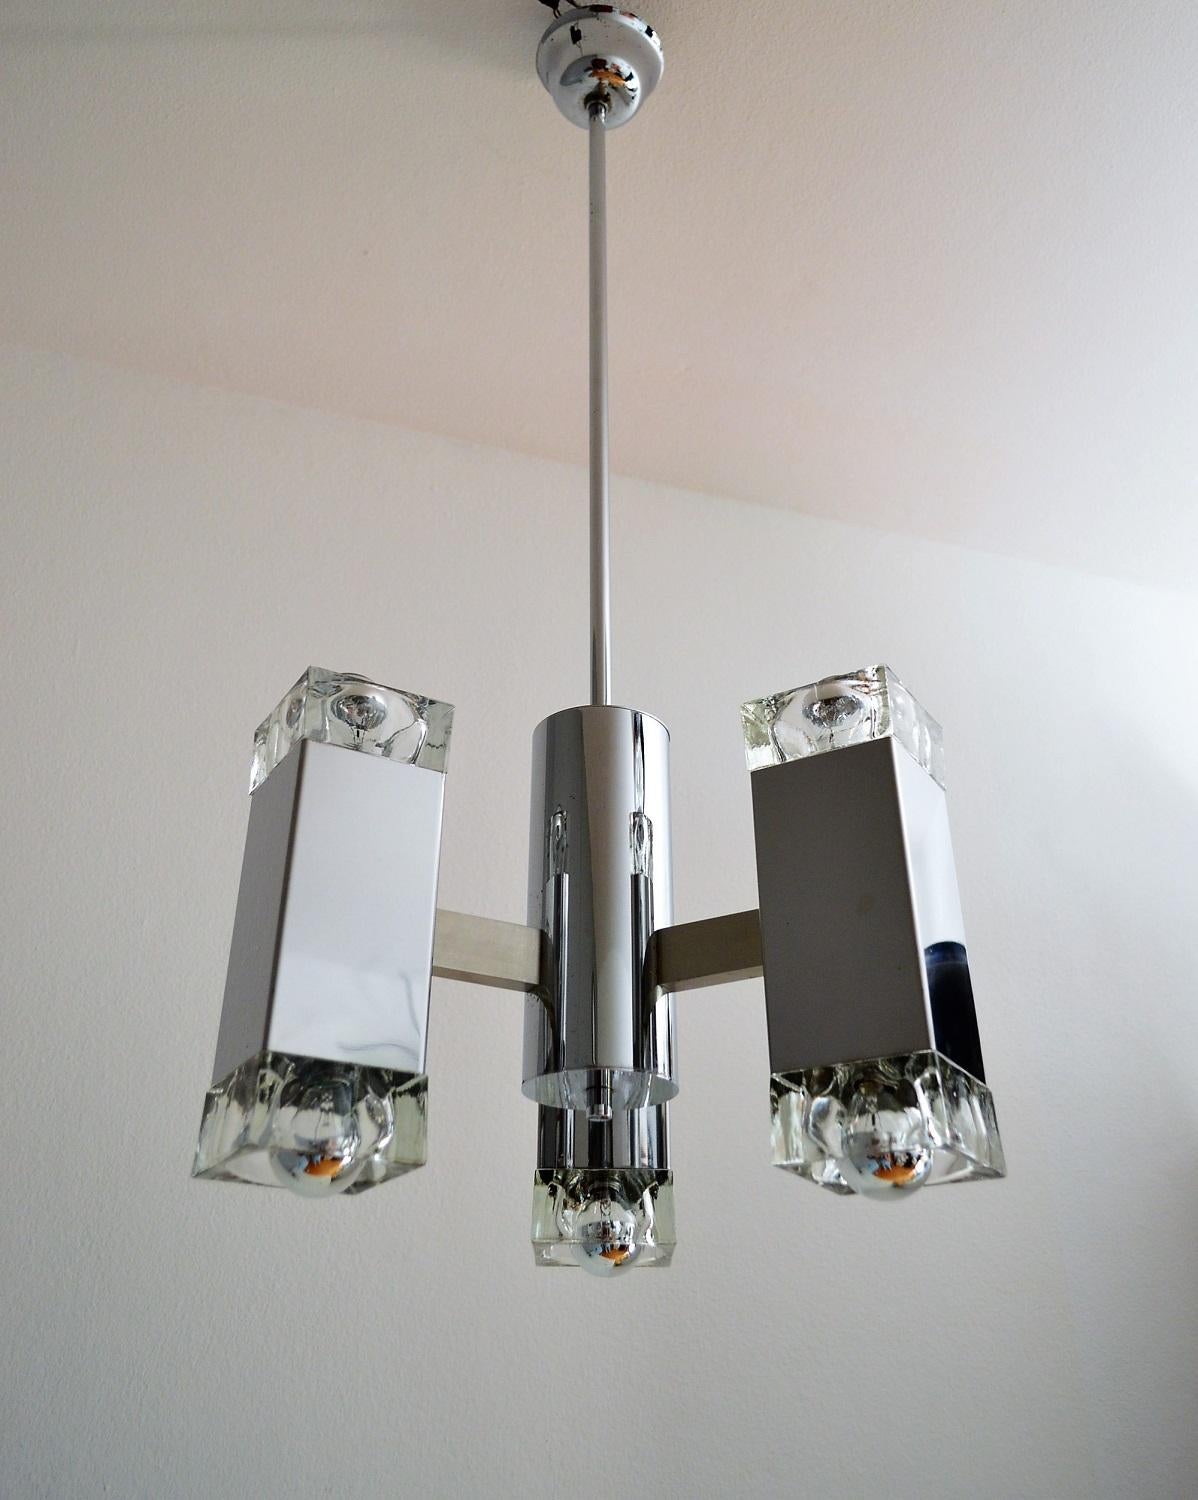 This modernist pendant chandelier, designed by Italian Gaetano Sciolari, is made of chromed metal, aluminium and six heavy cubic glasses ( three-lighting to the top ceiling, three-lighting downwards) , in which fit six small candelabra bulbs